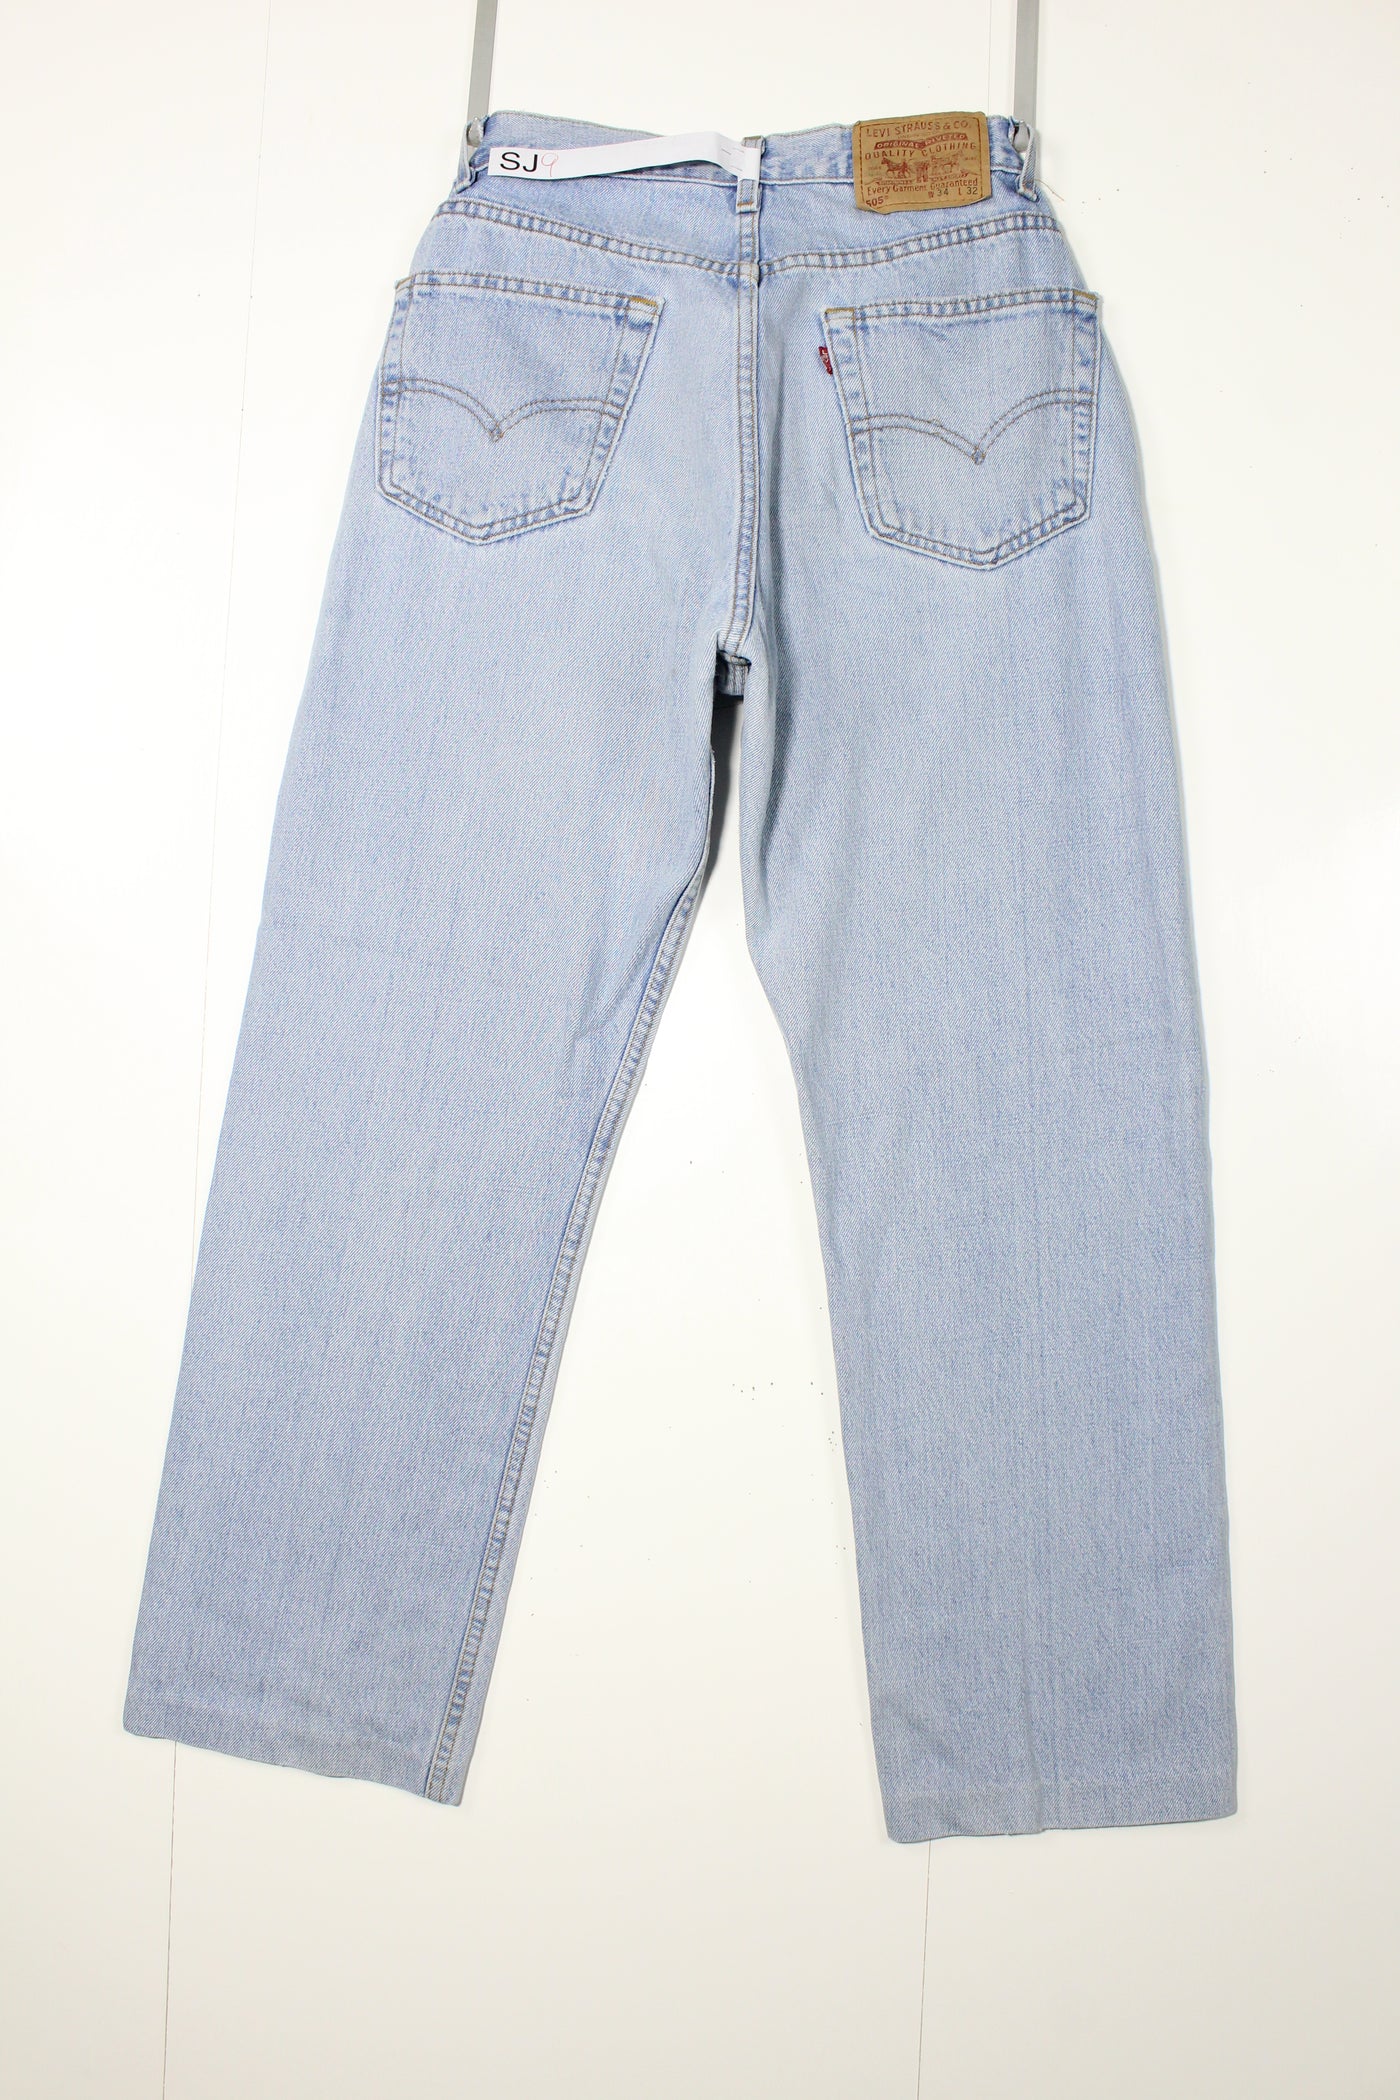 Levi's 505 Relaxed Fit Denim Made In USA W34 L32 Vintage